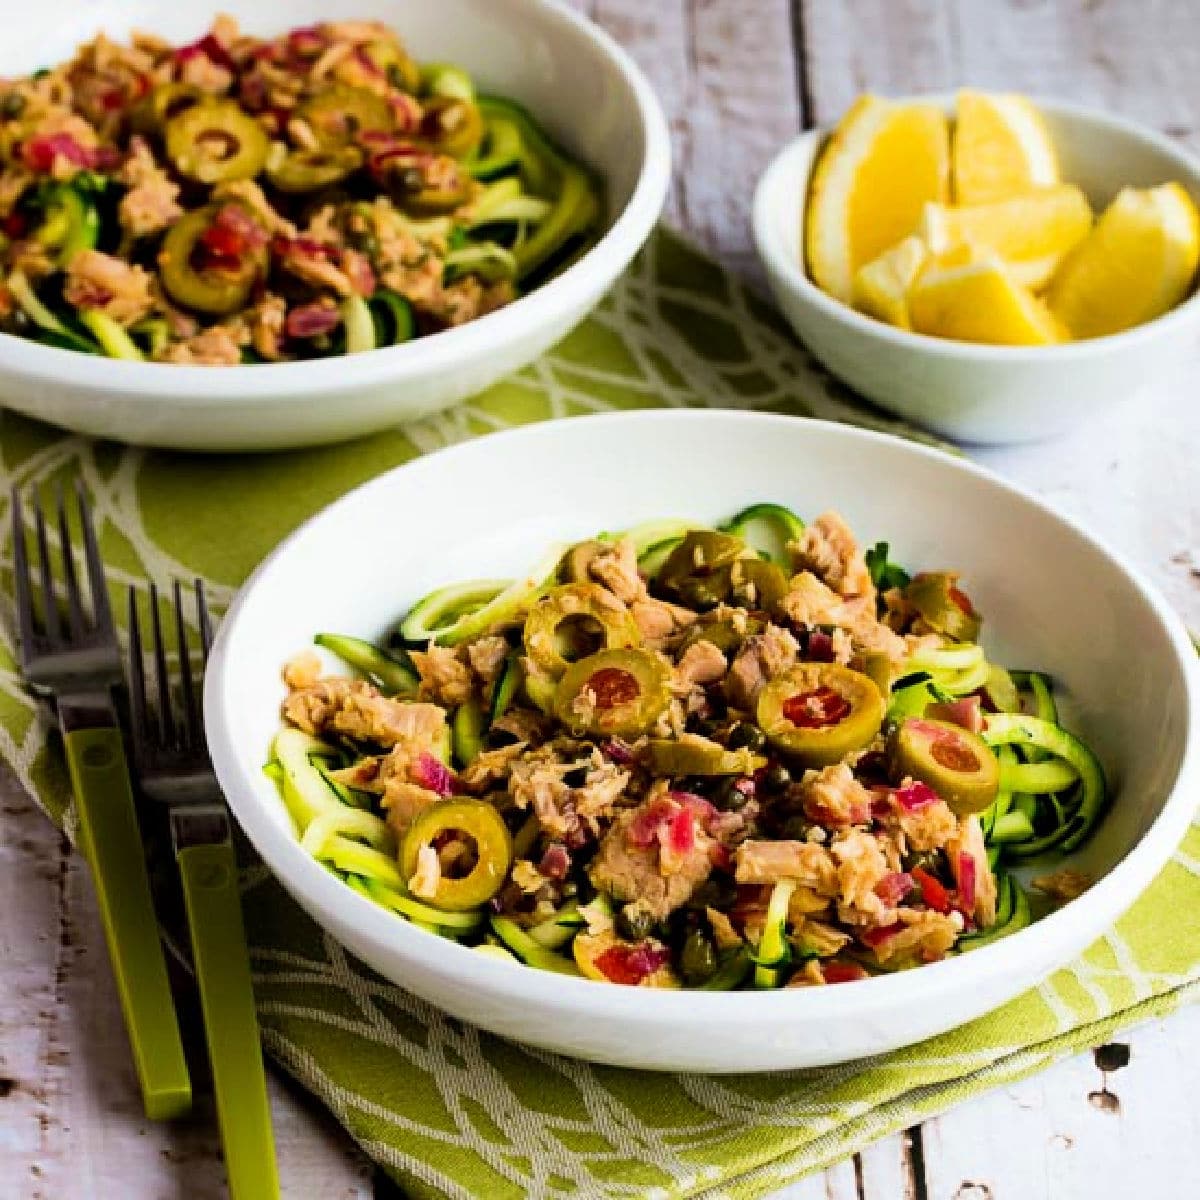 Square image of Tuna Zucchini Noodles with Green Olives shown in two serving bowls with lemons on the side.